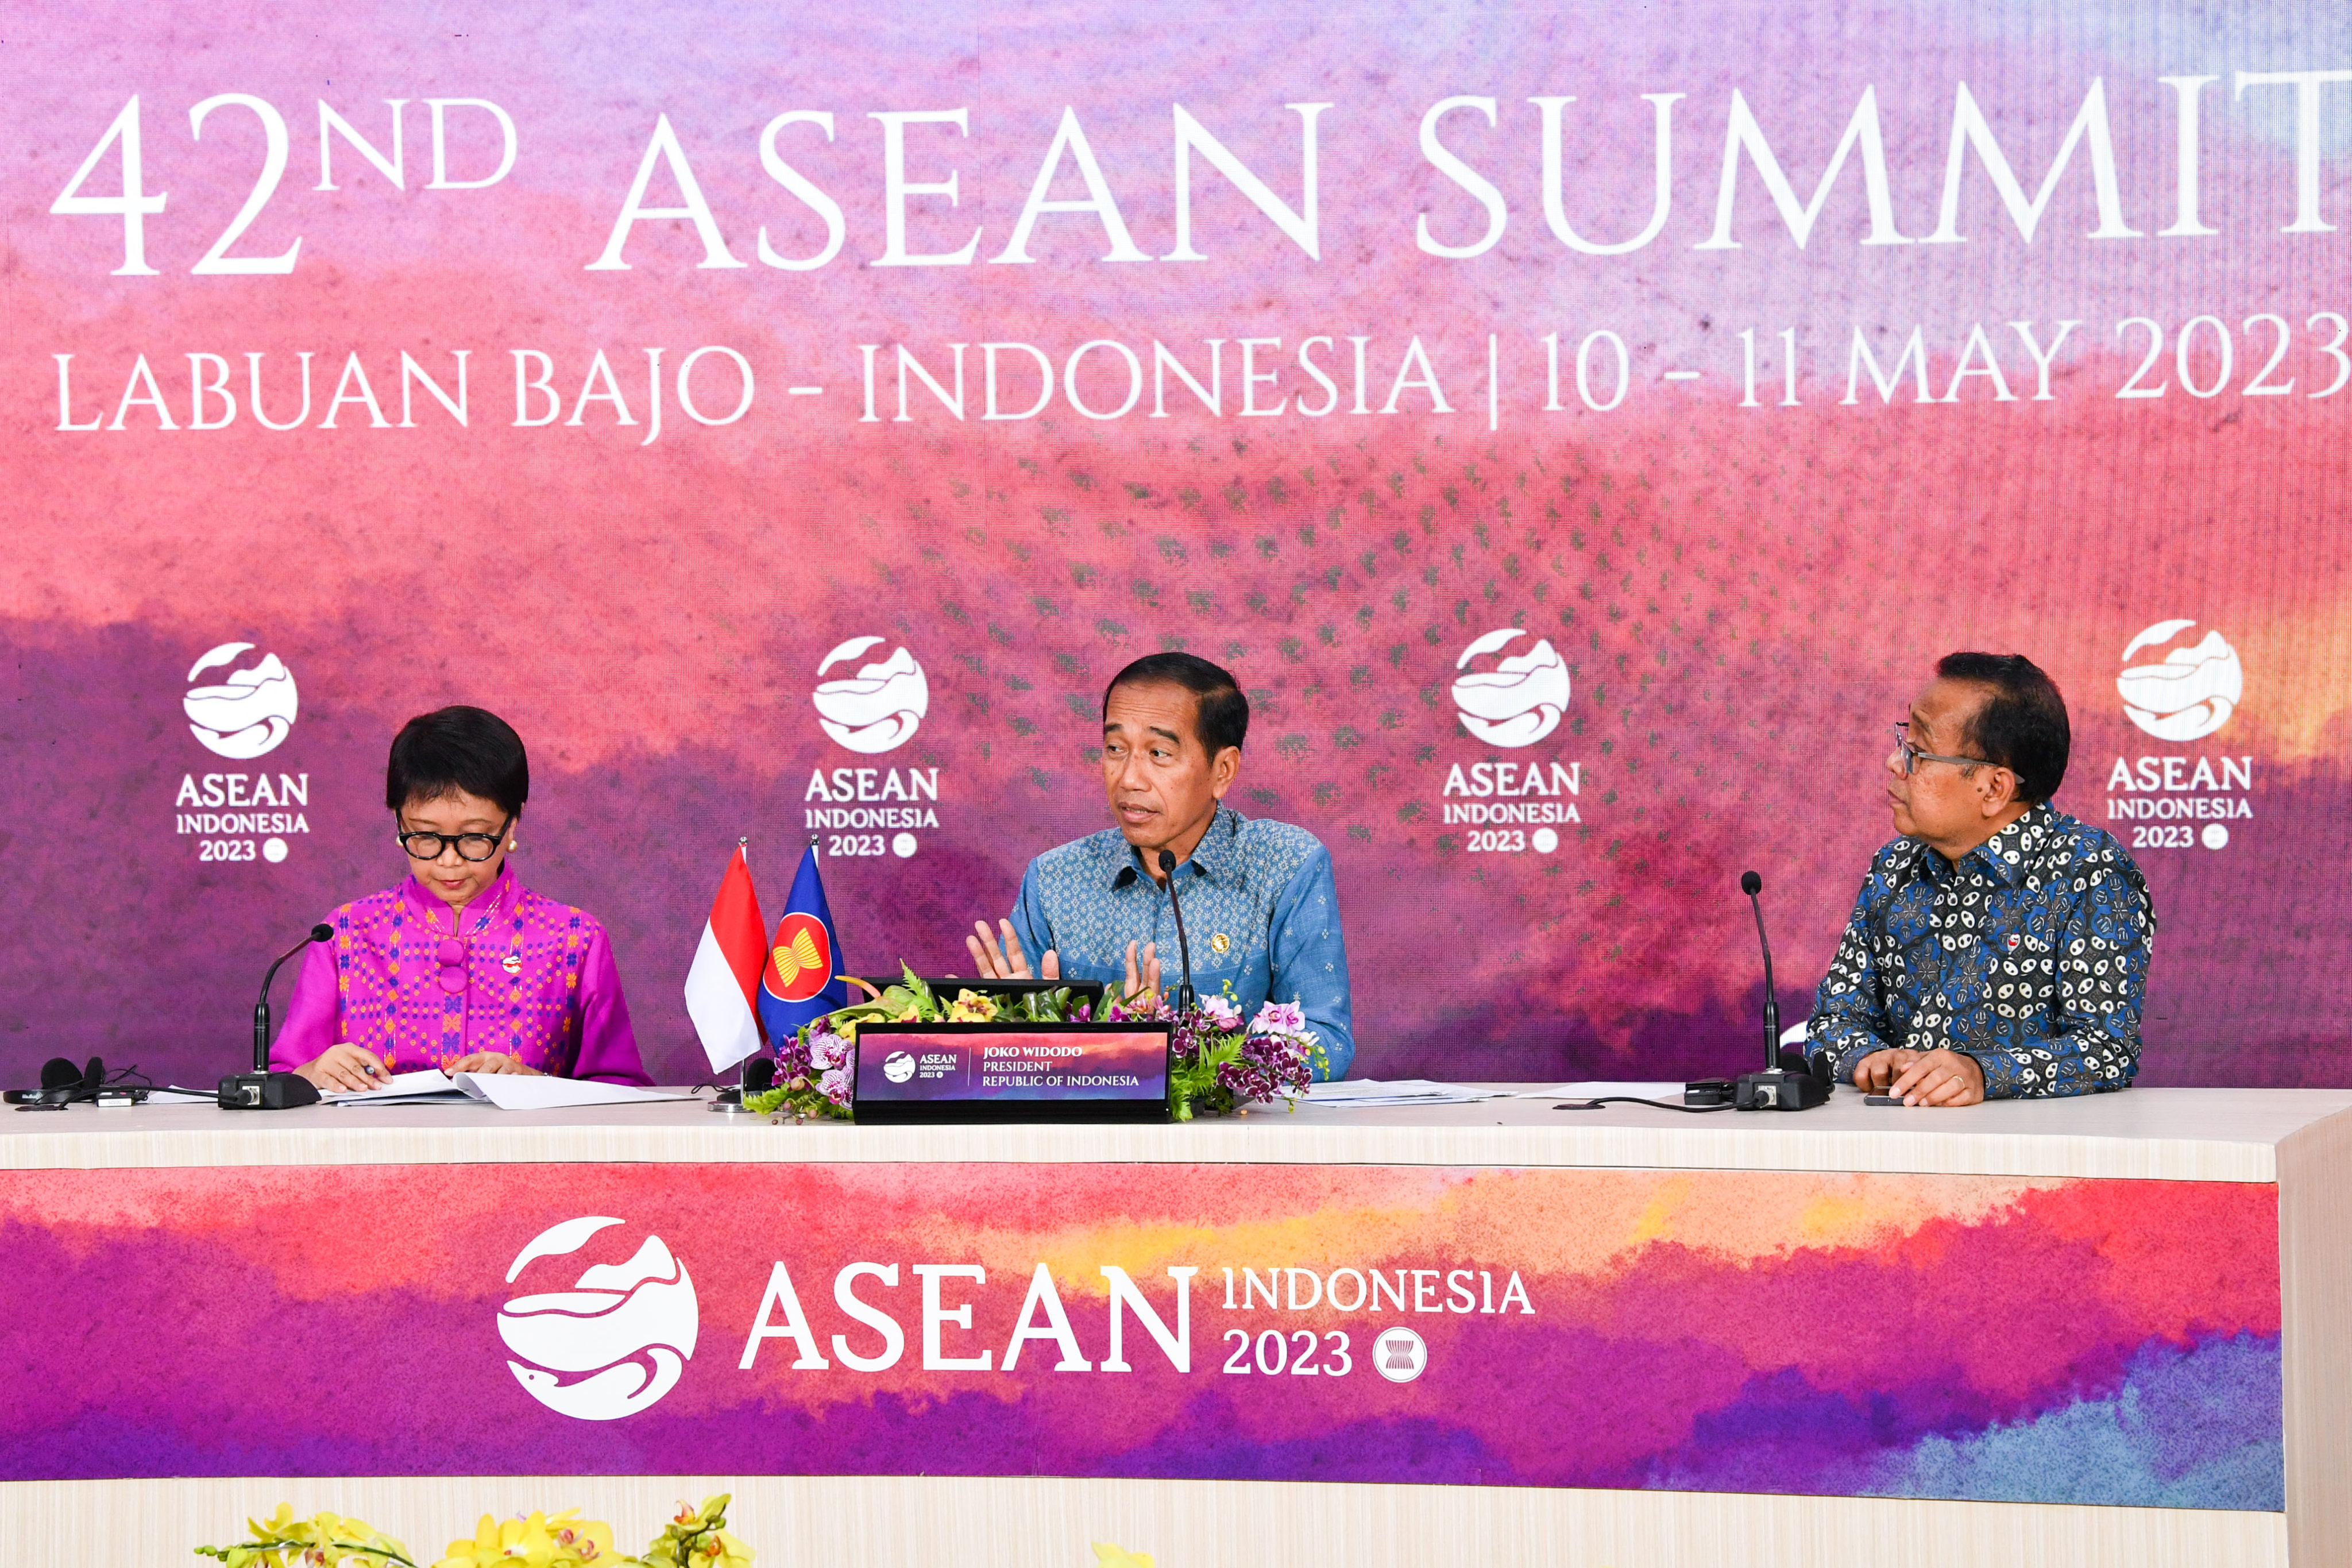 Indonesian President Joko Widodo (centre) speaks at a press conference at the 42nd Asean Summit in Labuan Bajo, Indonesia, on May 11. Photo: Xinhua